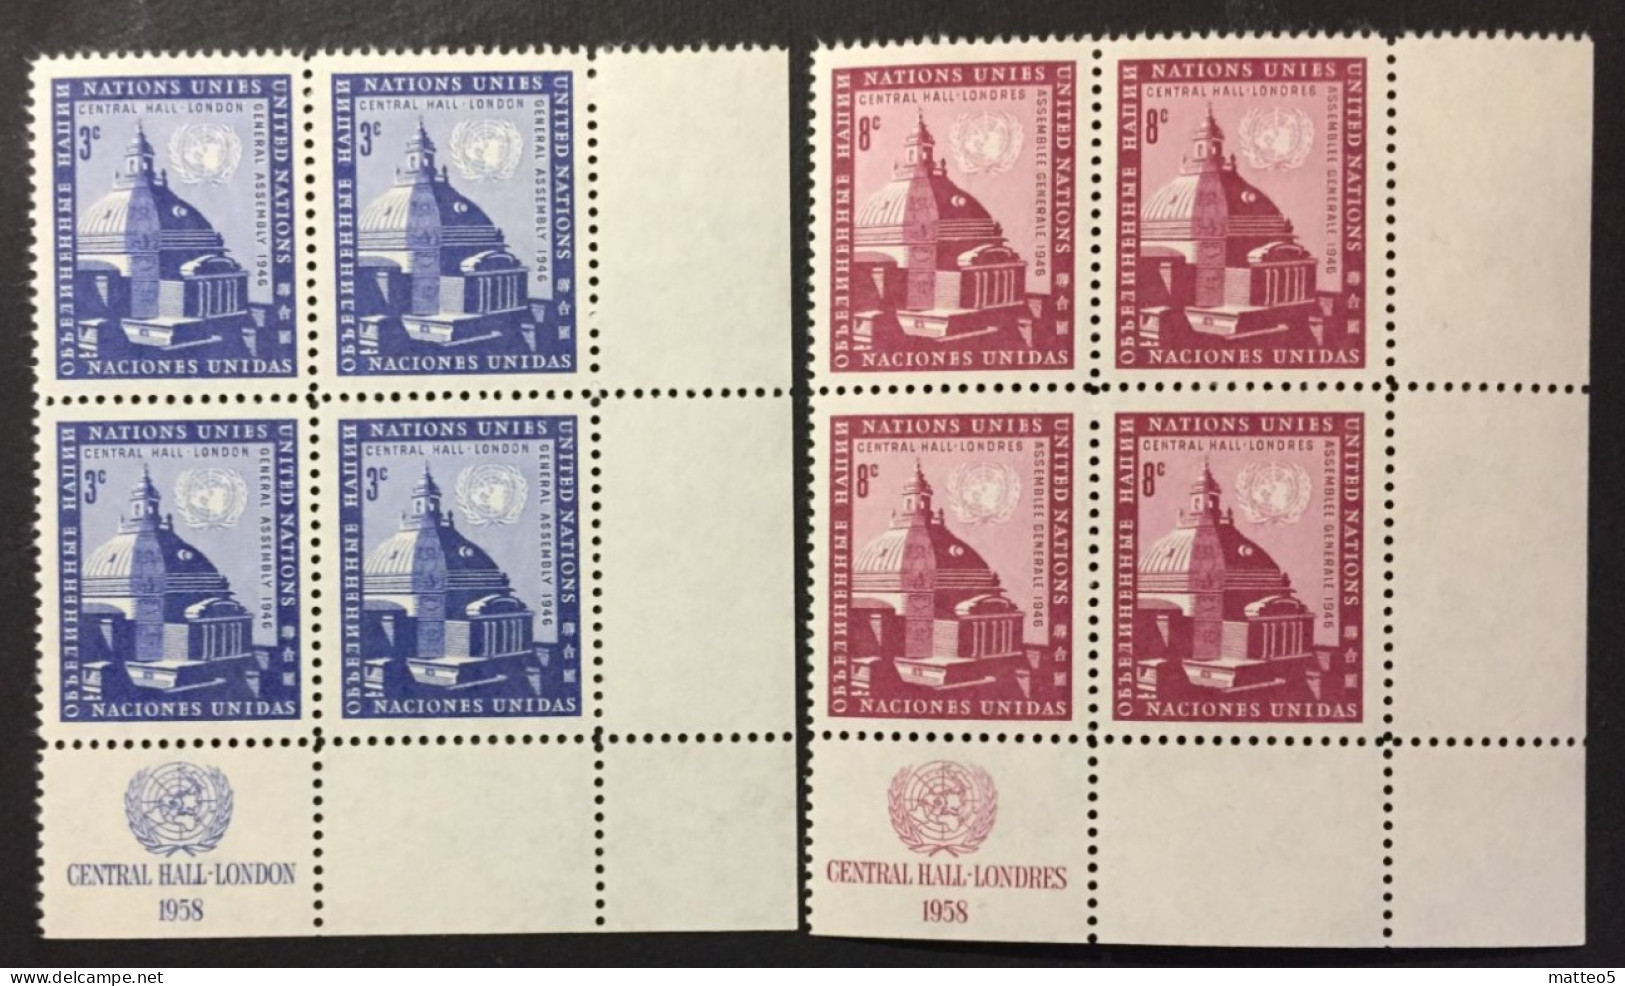 1958 - United Nations UNO UN ONU - General Assembly, UNN Assembly Buildings - 2 X4 Stamps Unused - Ungebraucht